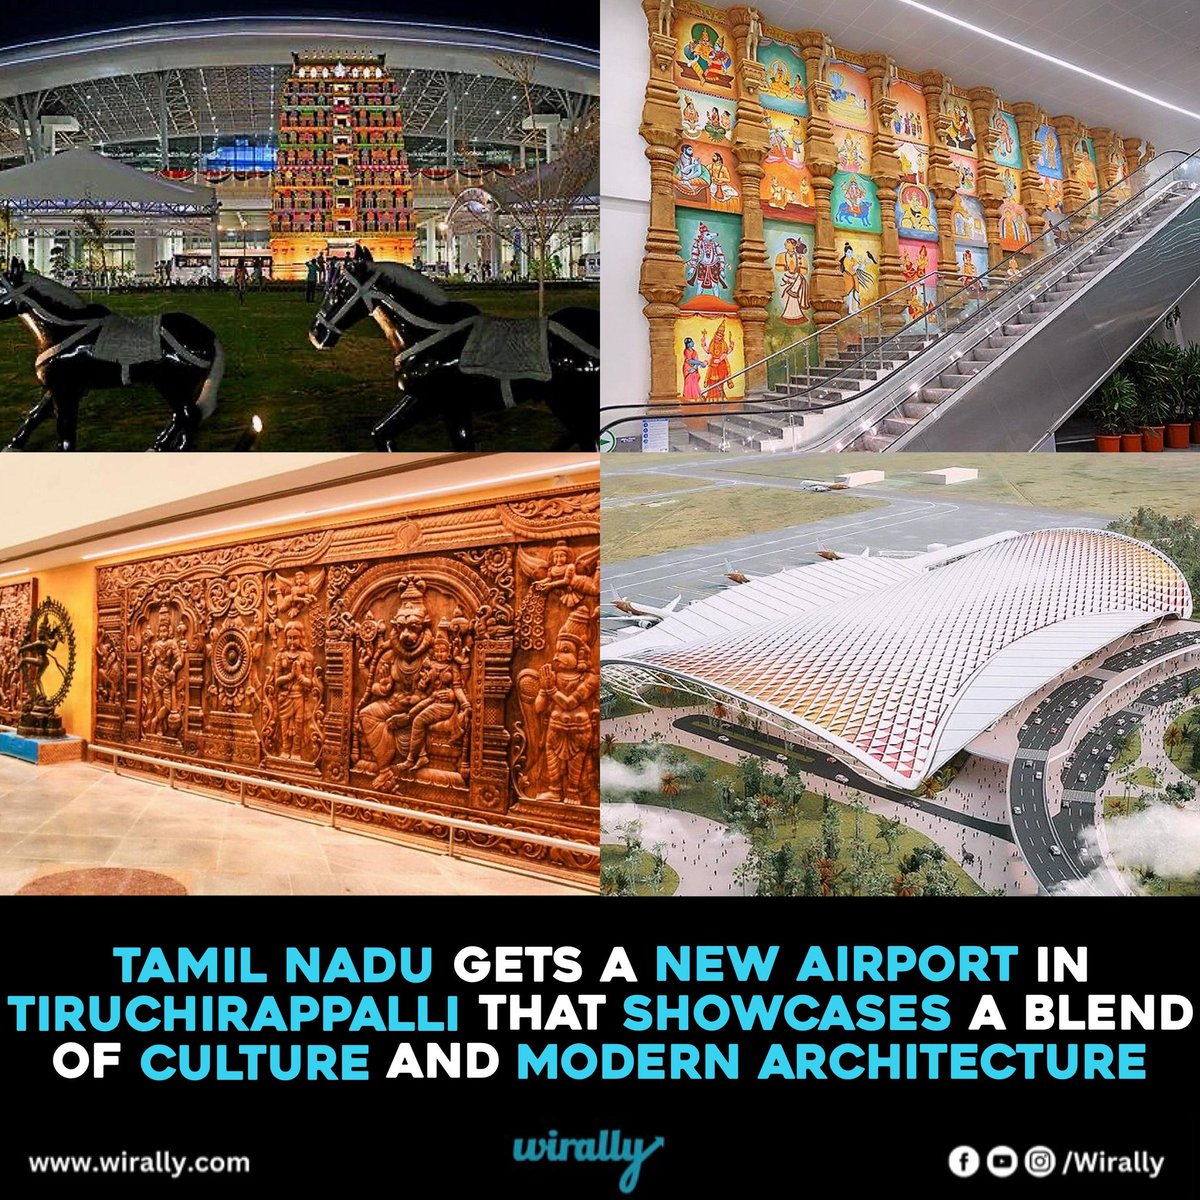 The airport highlights the connection of India to other nations through its dynamic external facade and splendid interiors. #Chennai #TamilNadu #aiport